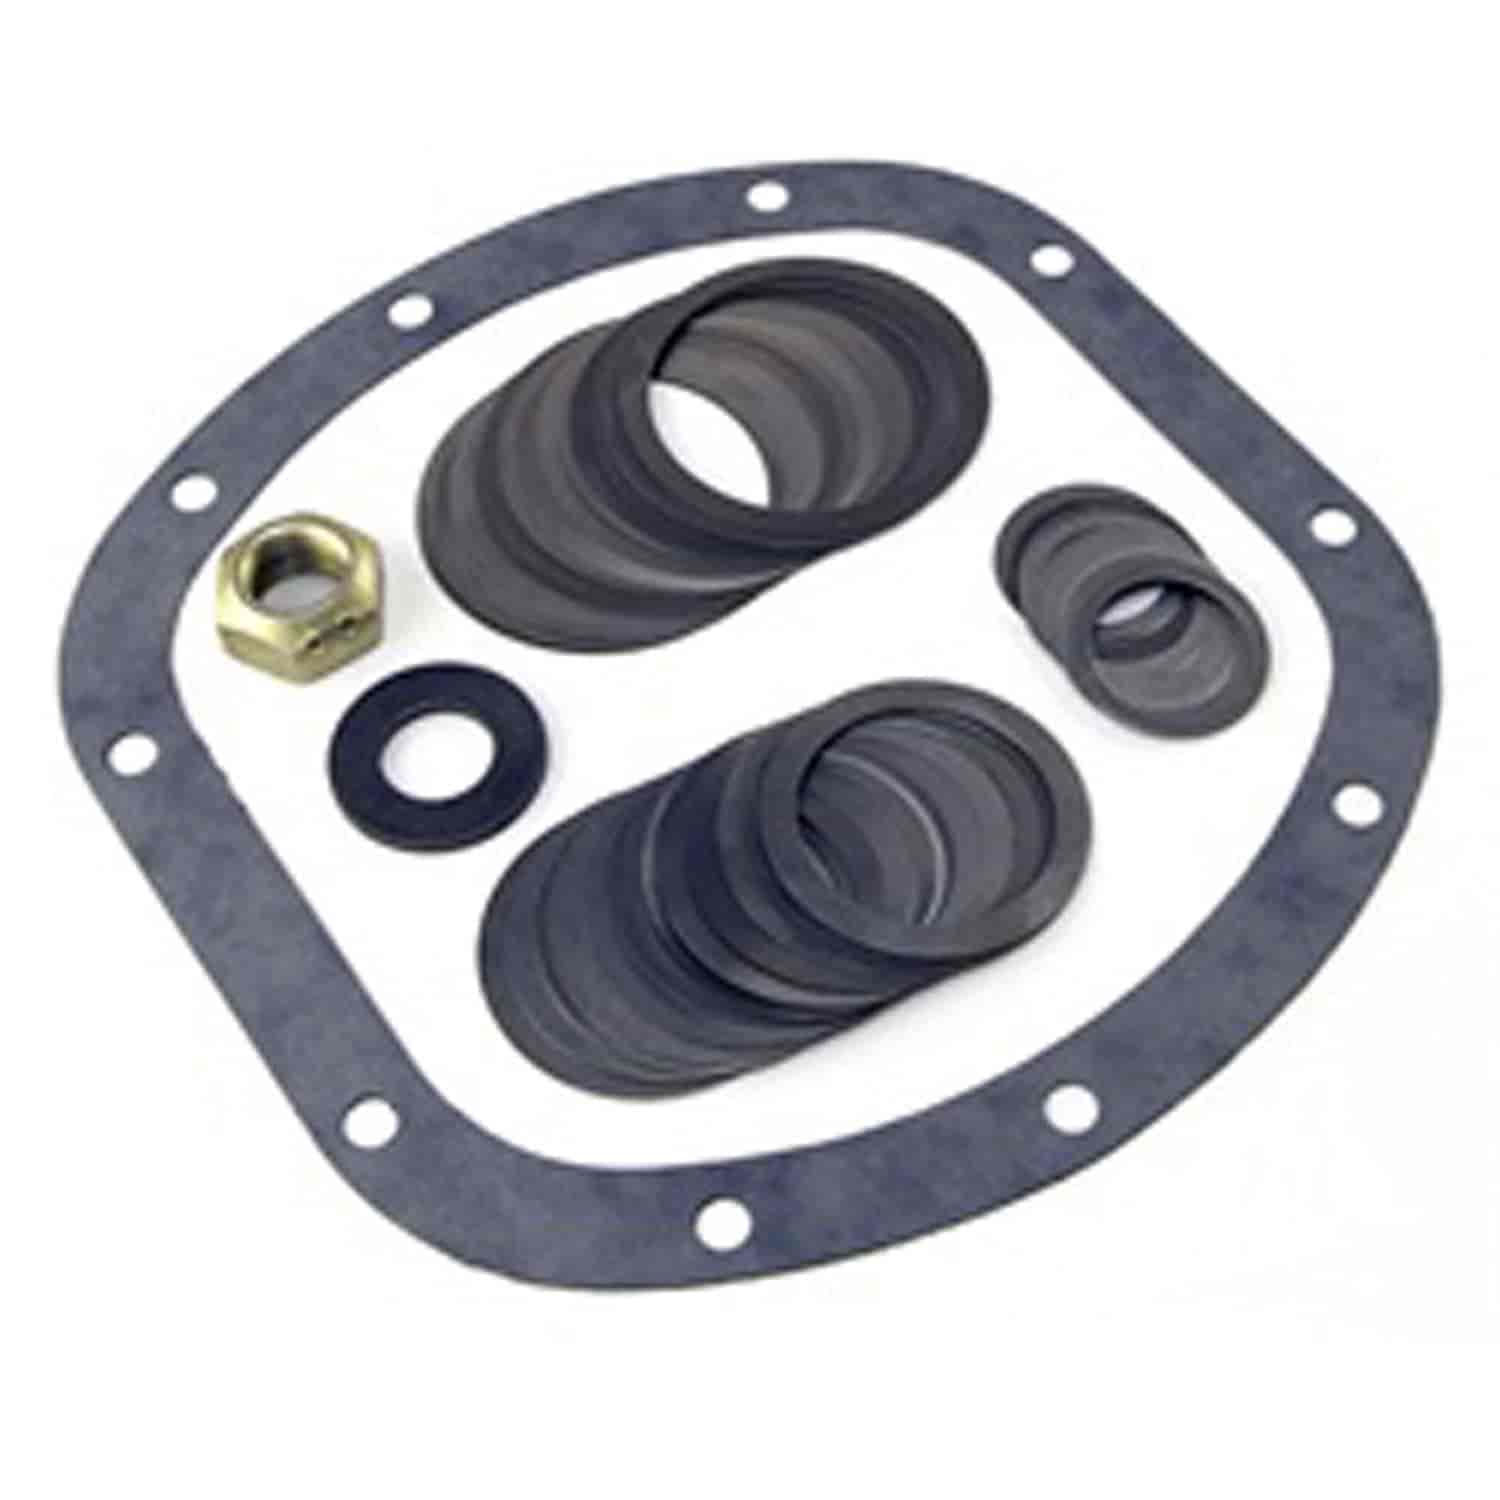 Differential Side Bearing Shim Kit for Dana 25 and Dana 27 1941-71 Models